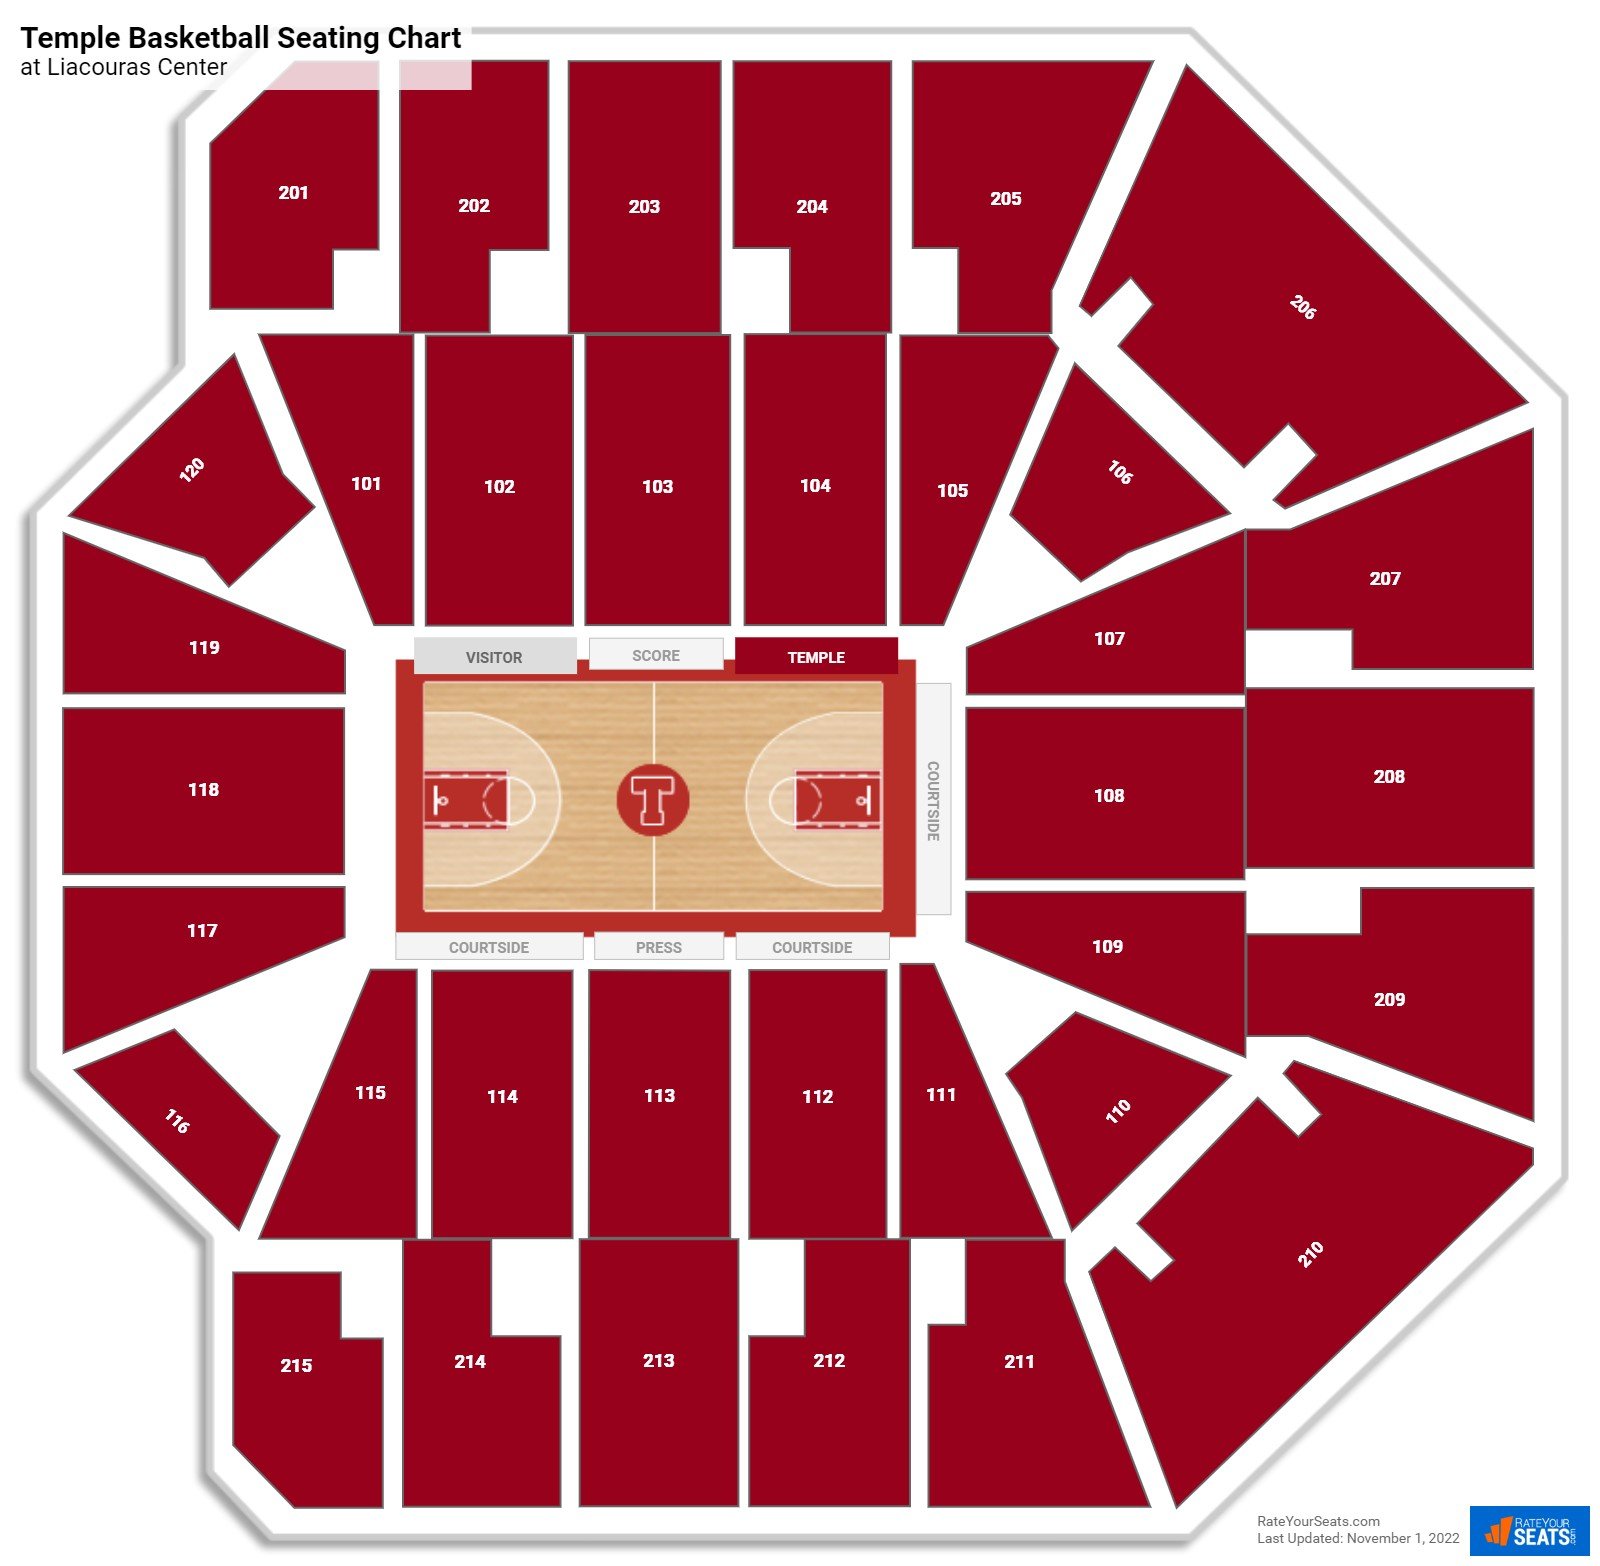 Temple Owls Seating Chart at Liacouras Center